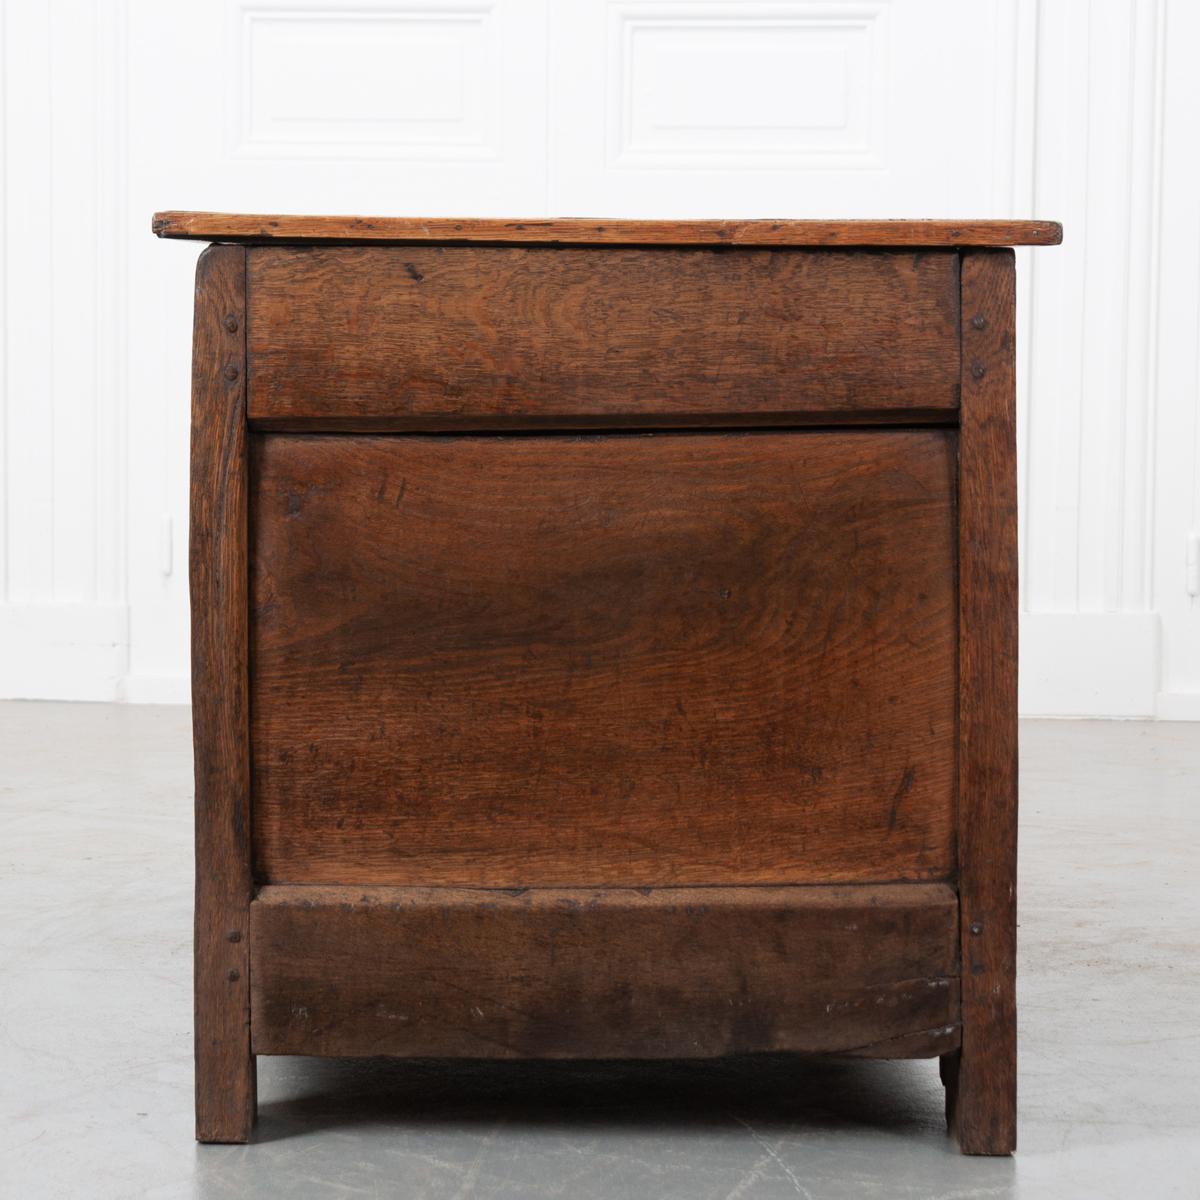 English Early 18th Century Carved Coffer For Sale at 1stDibs